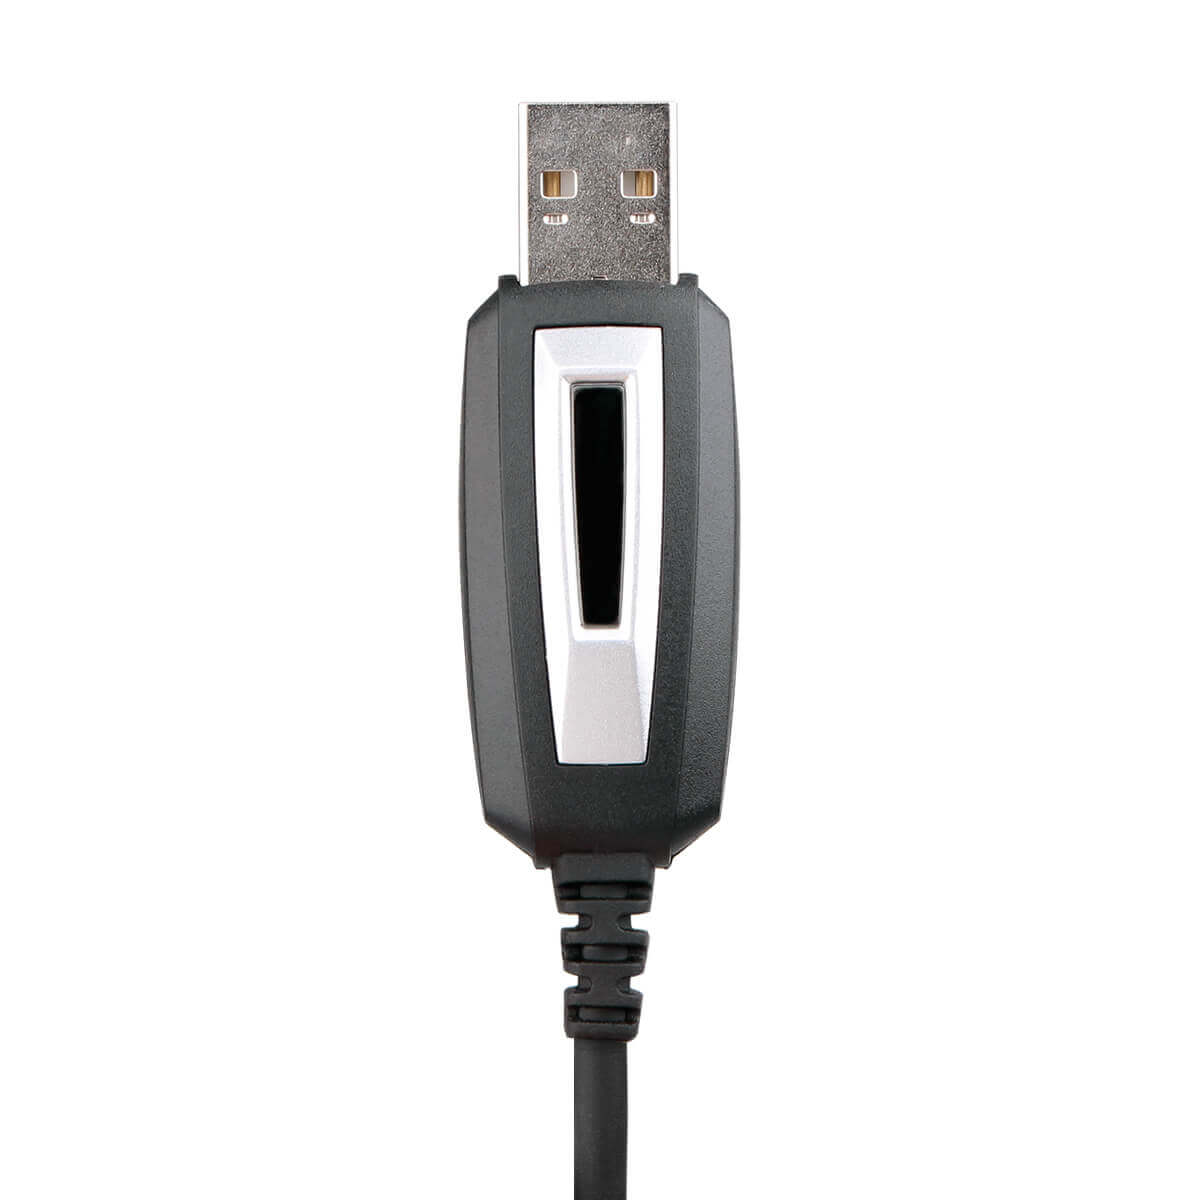 Retevis USB programming cable for HD1 DMR Radio